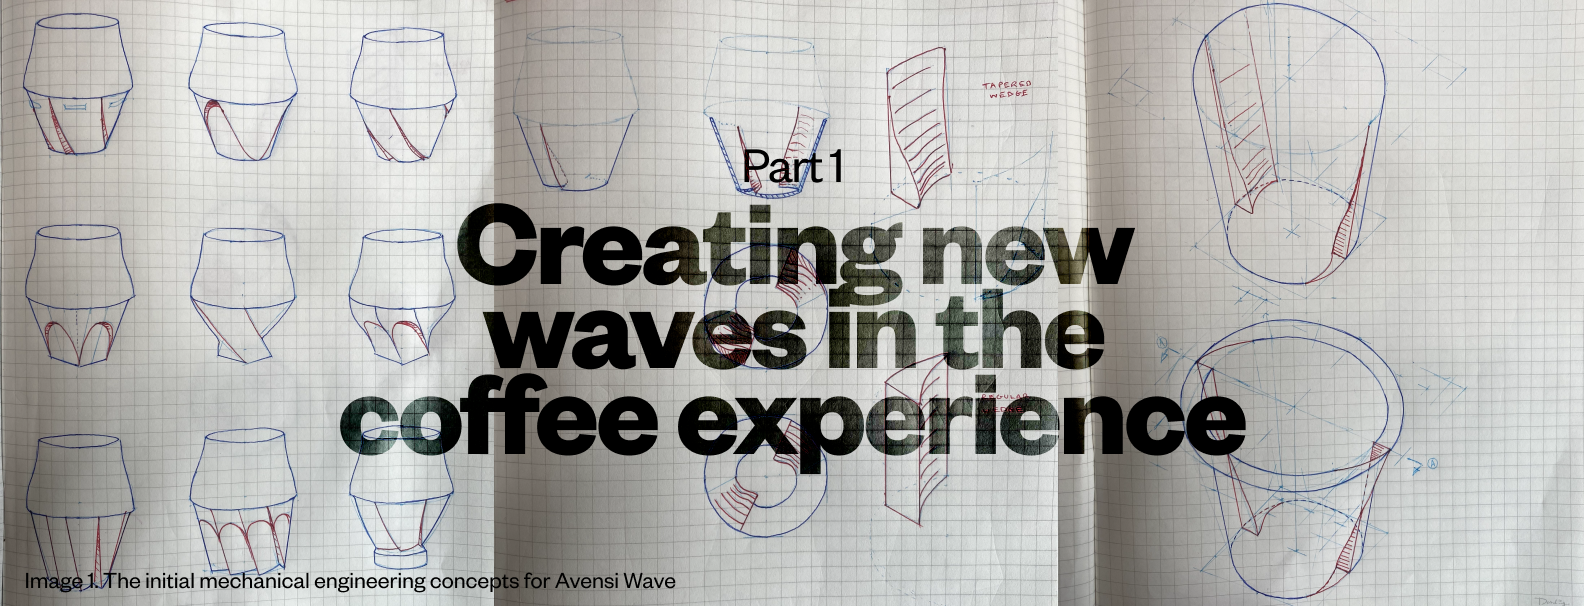 Avensi Wave: Creating New Waves in the Coffee Experience